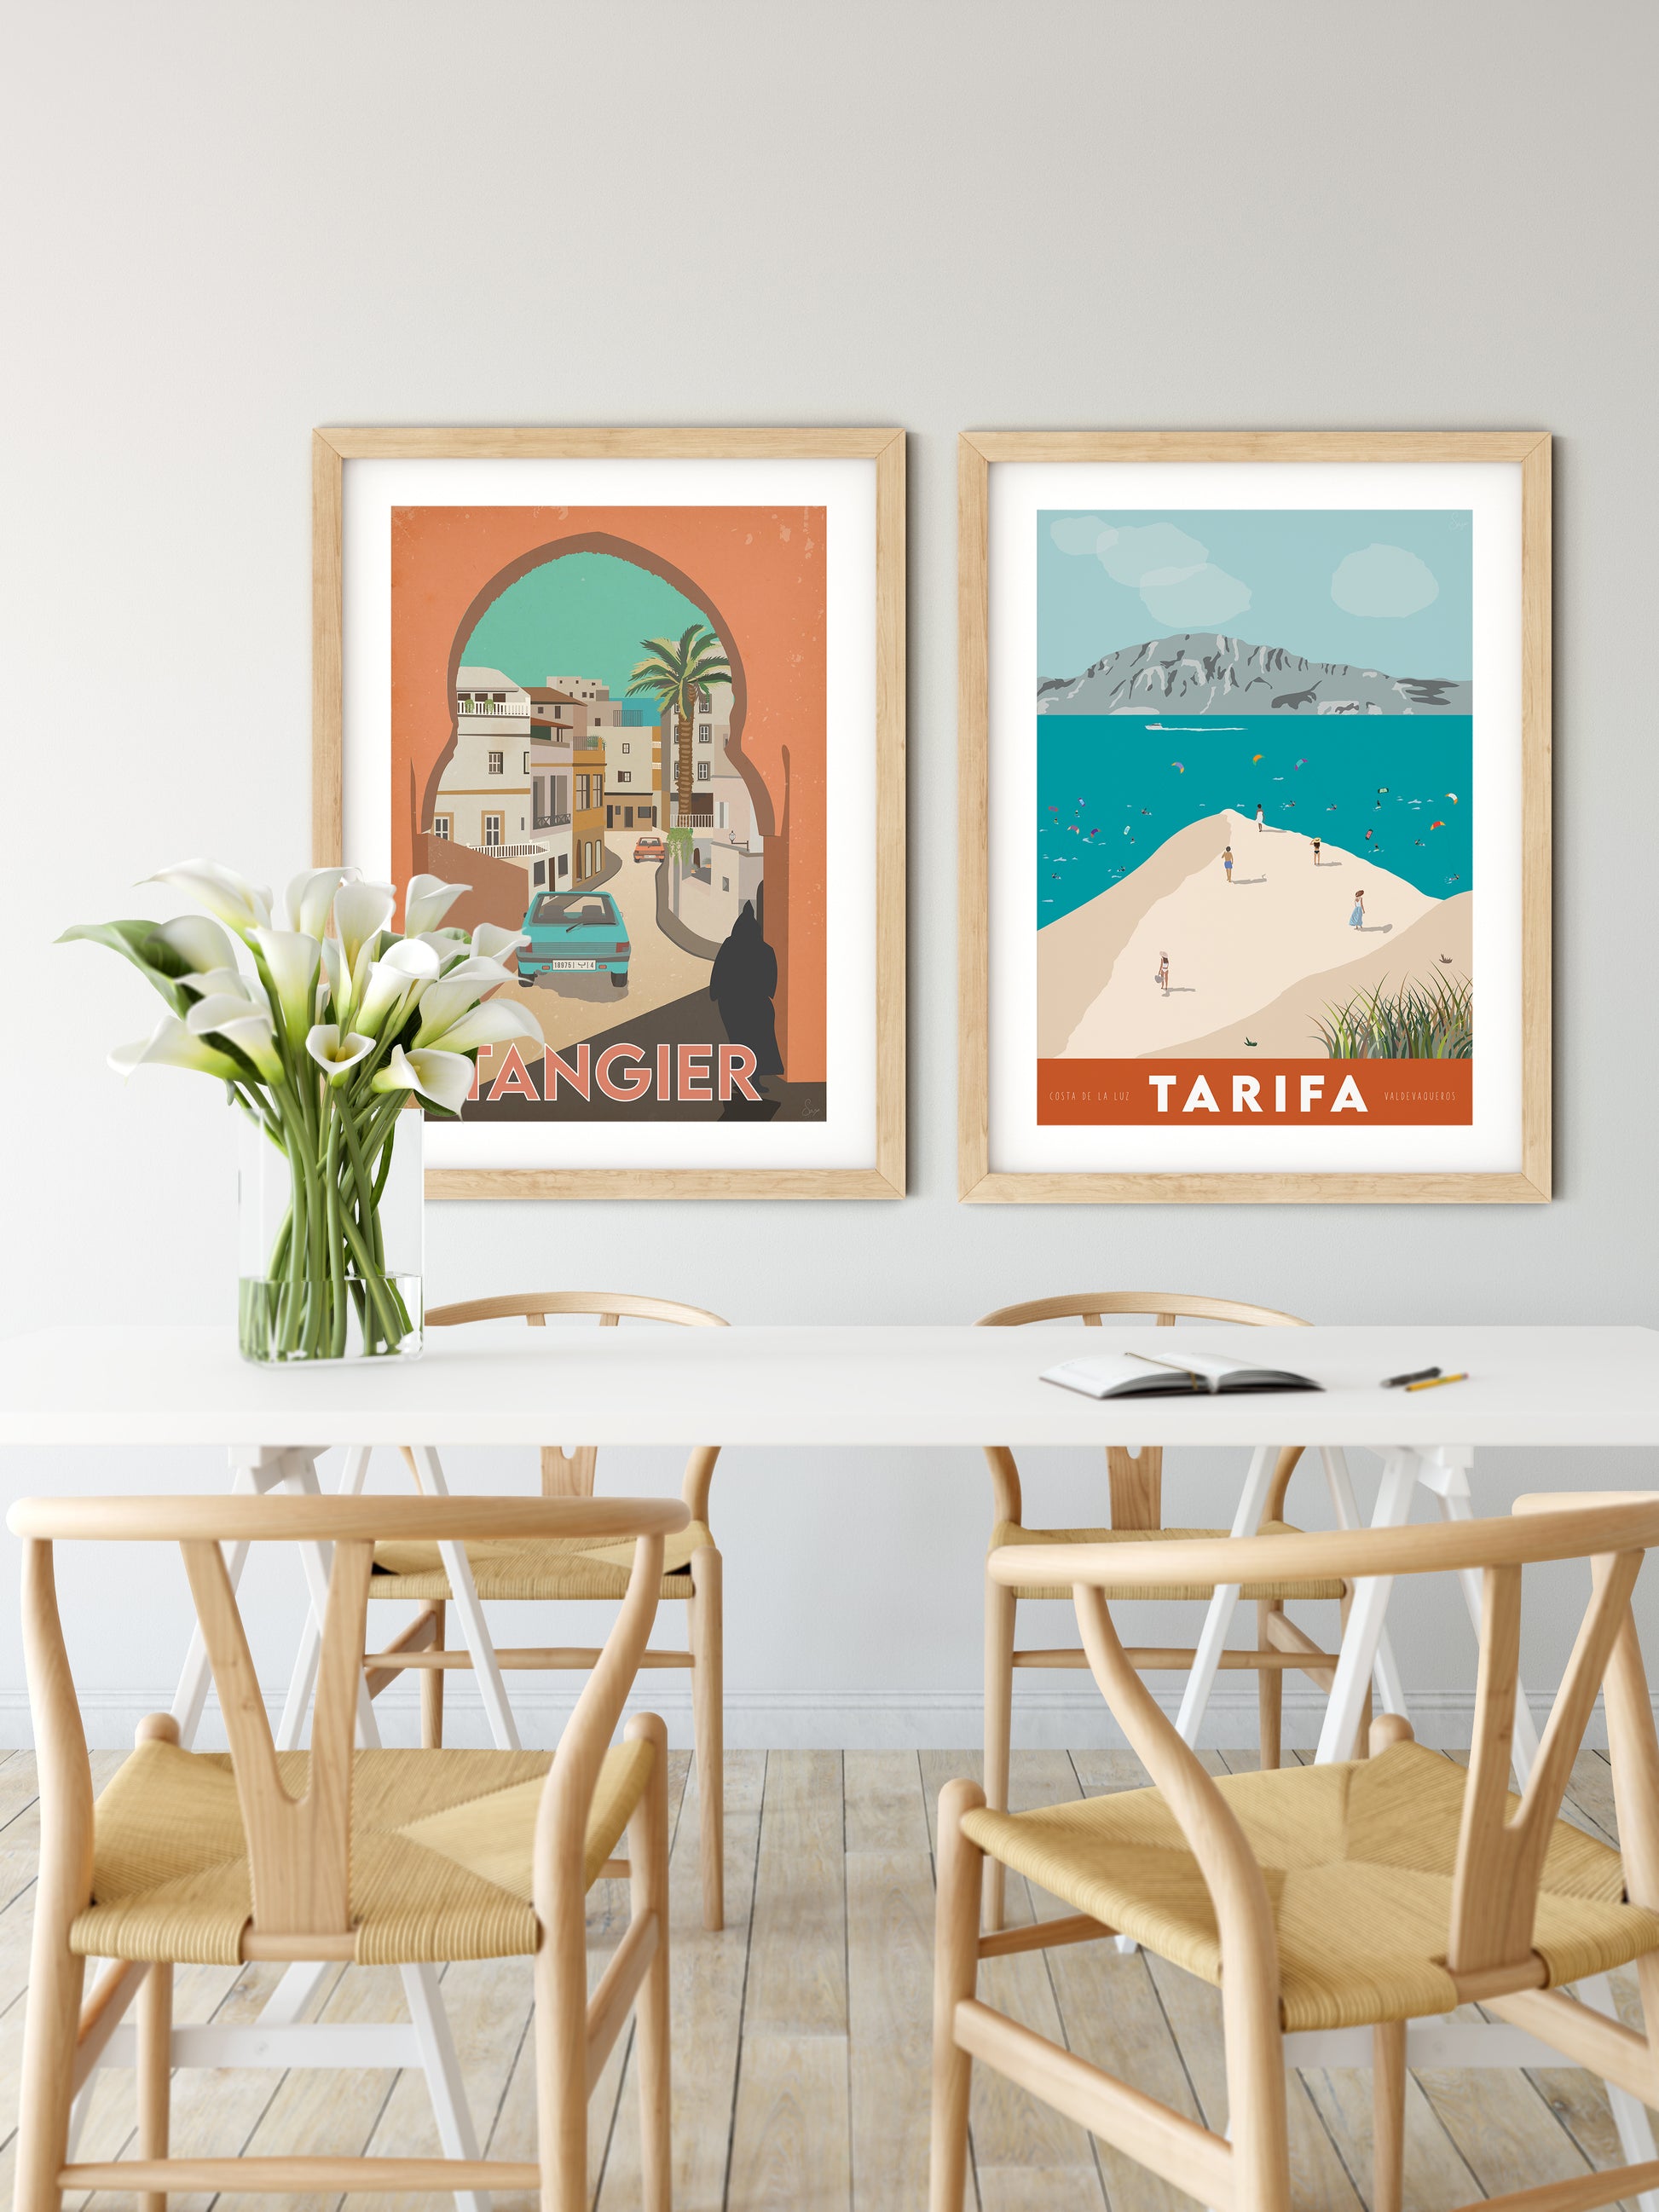 Vintage inspired travel print of Tangier, Morrocco 